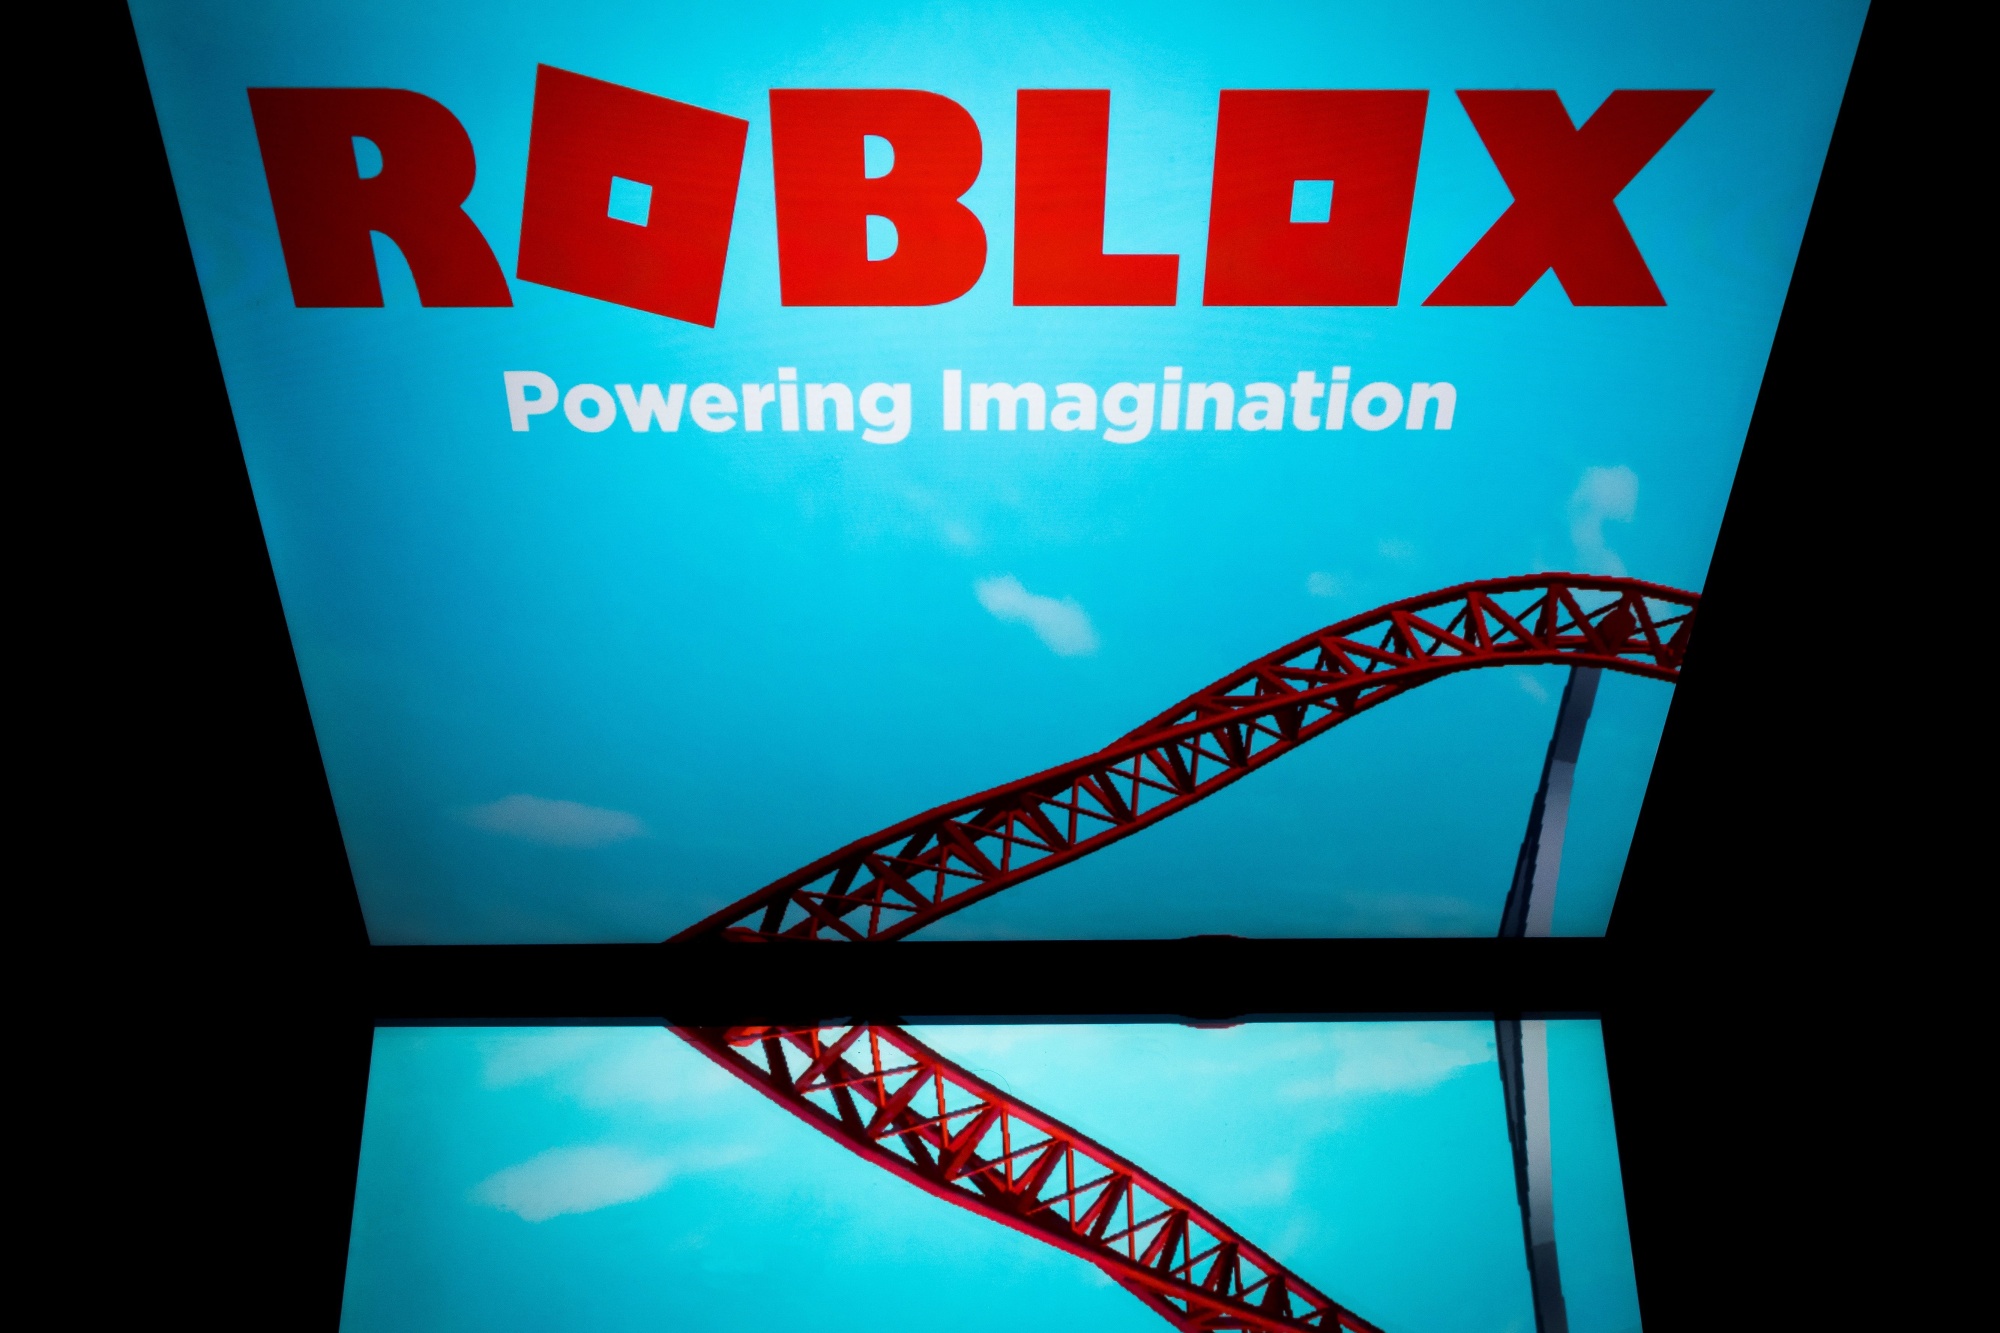 Roblox is seeing a surge during coronavirus shelter-in-place